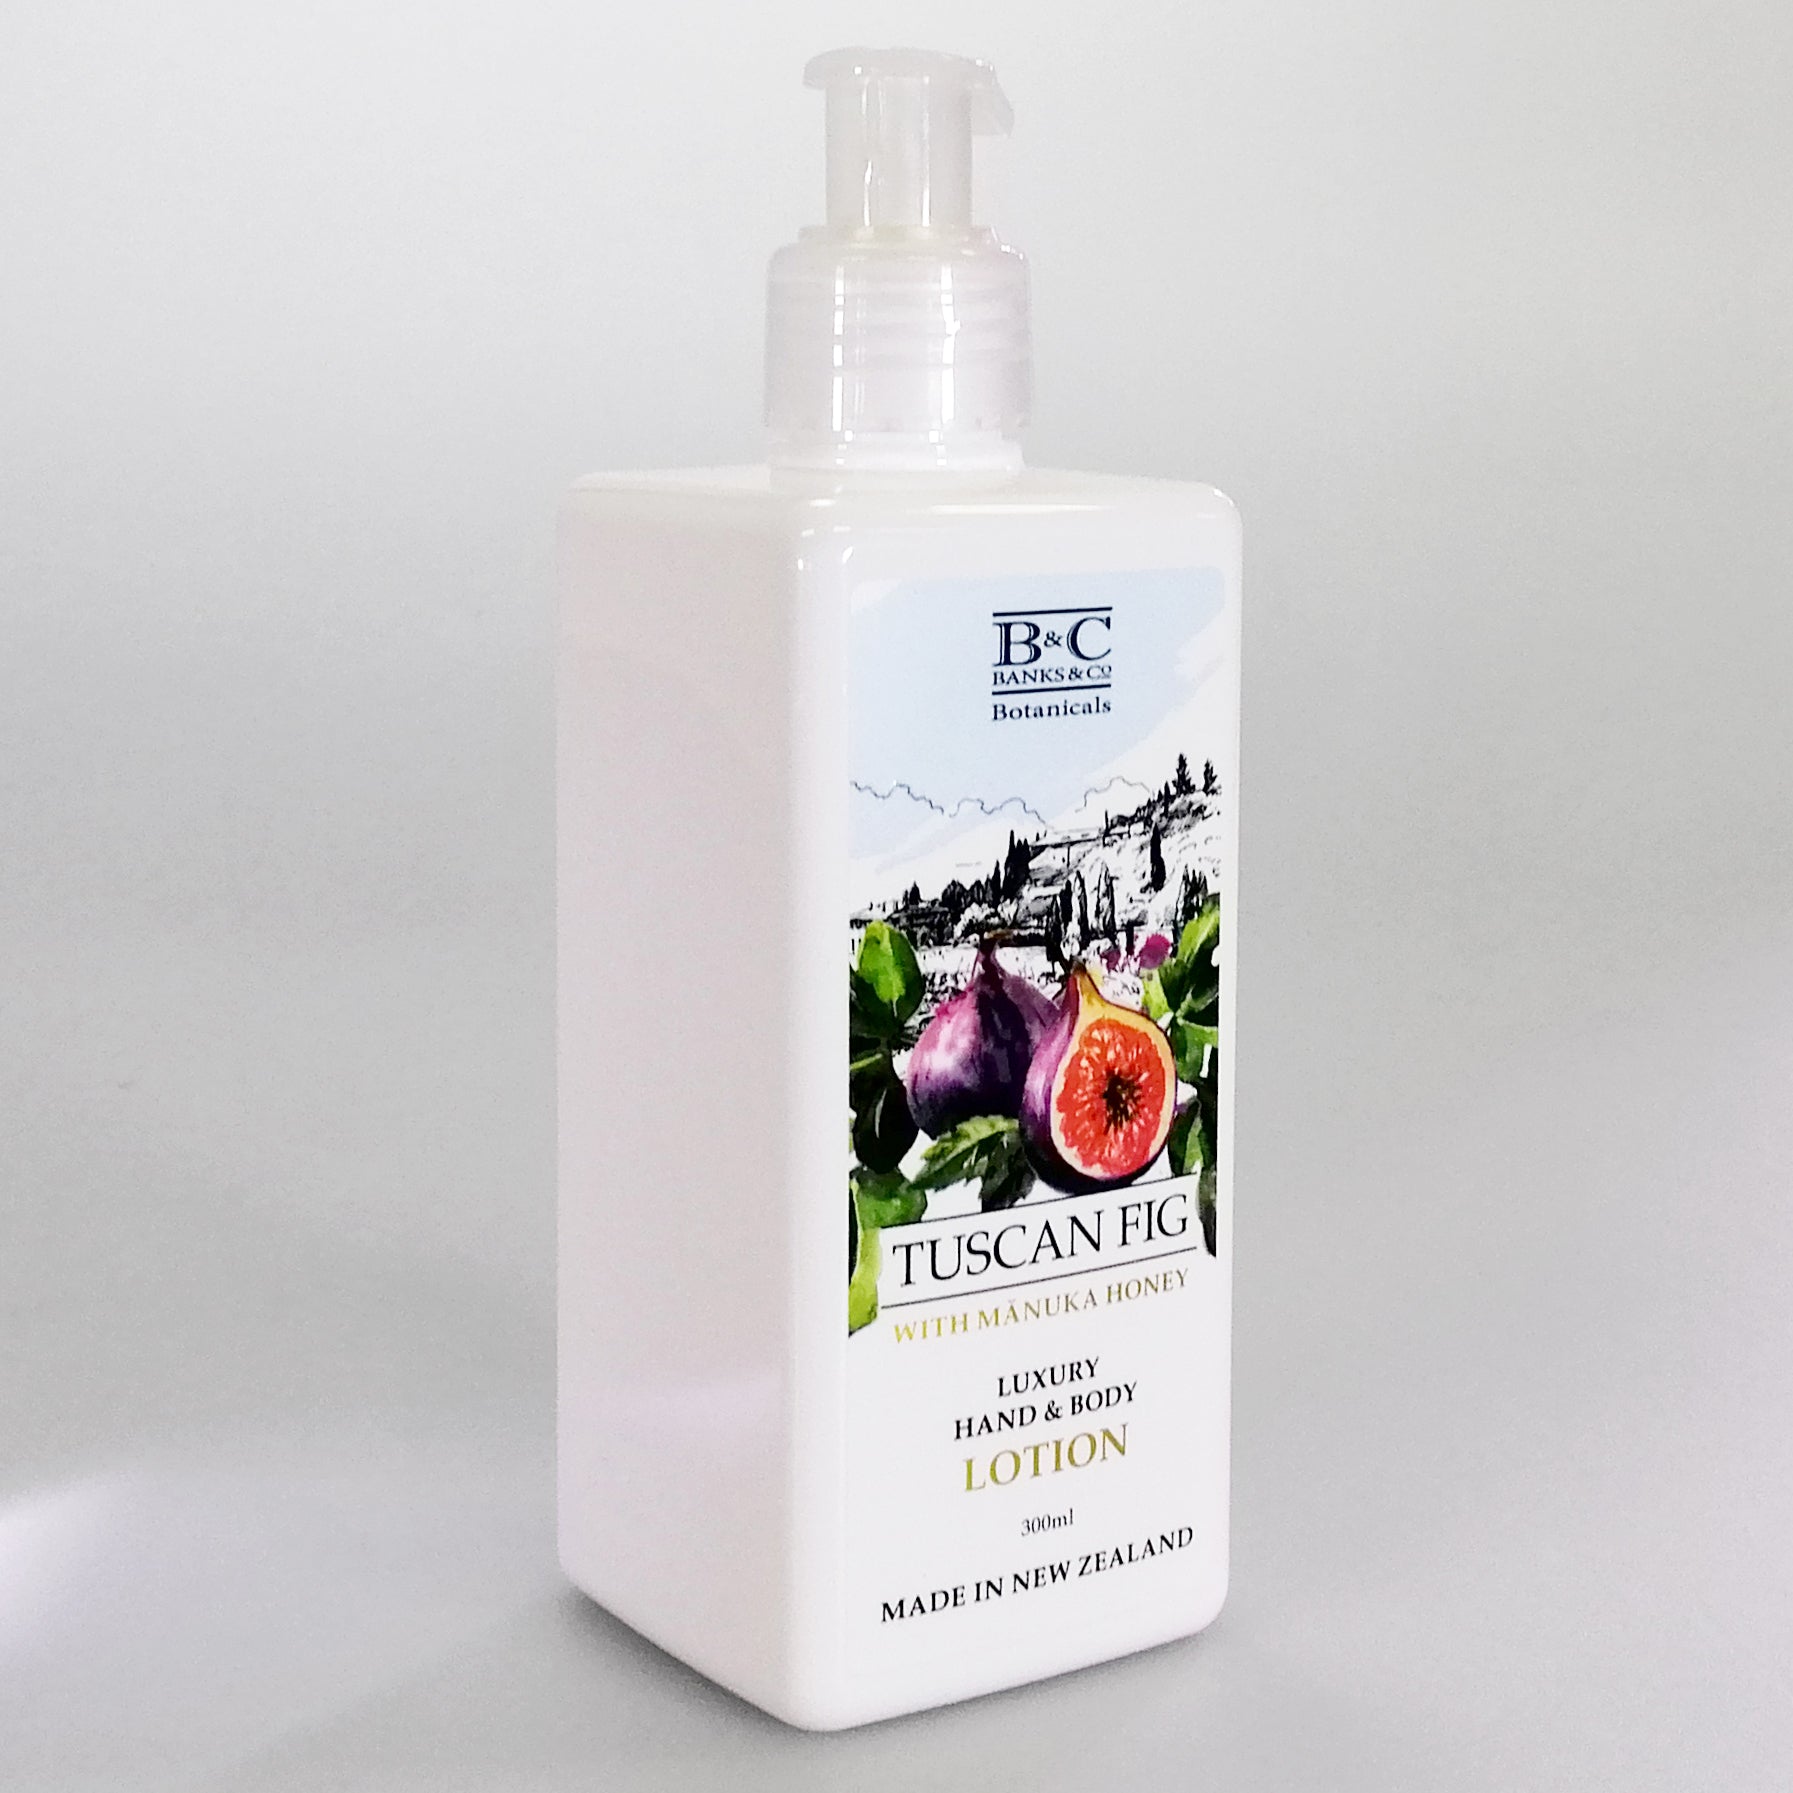 Banks & Co. Botanicals - Tuscan Fig - Hand & Body Lotion